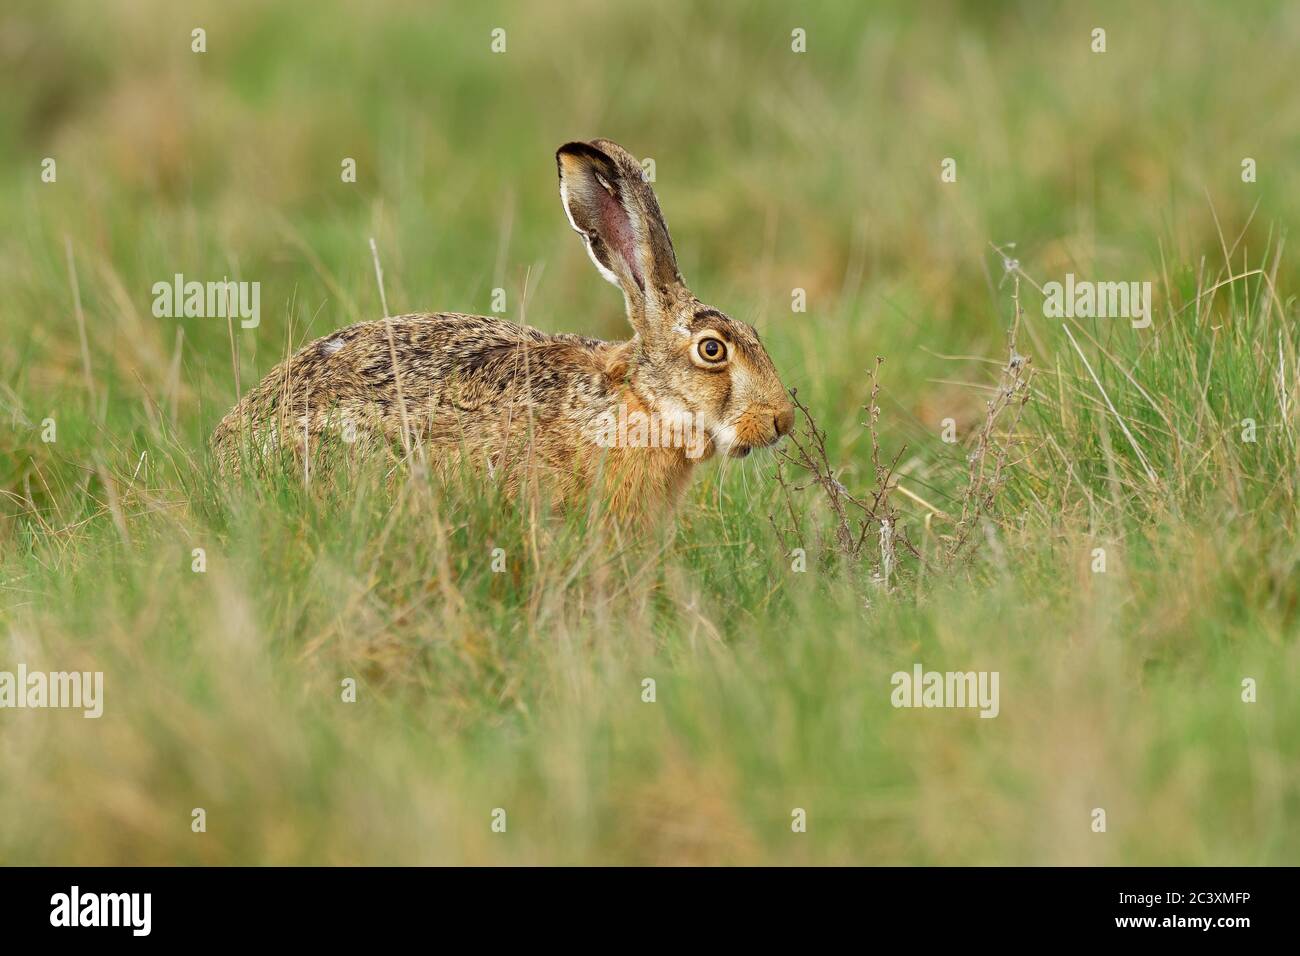 T Europaeus High Resolution Stock Photography And Images Alamy